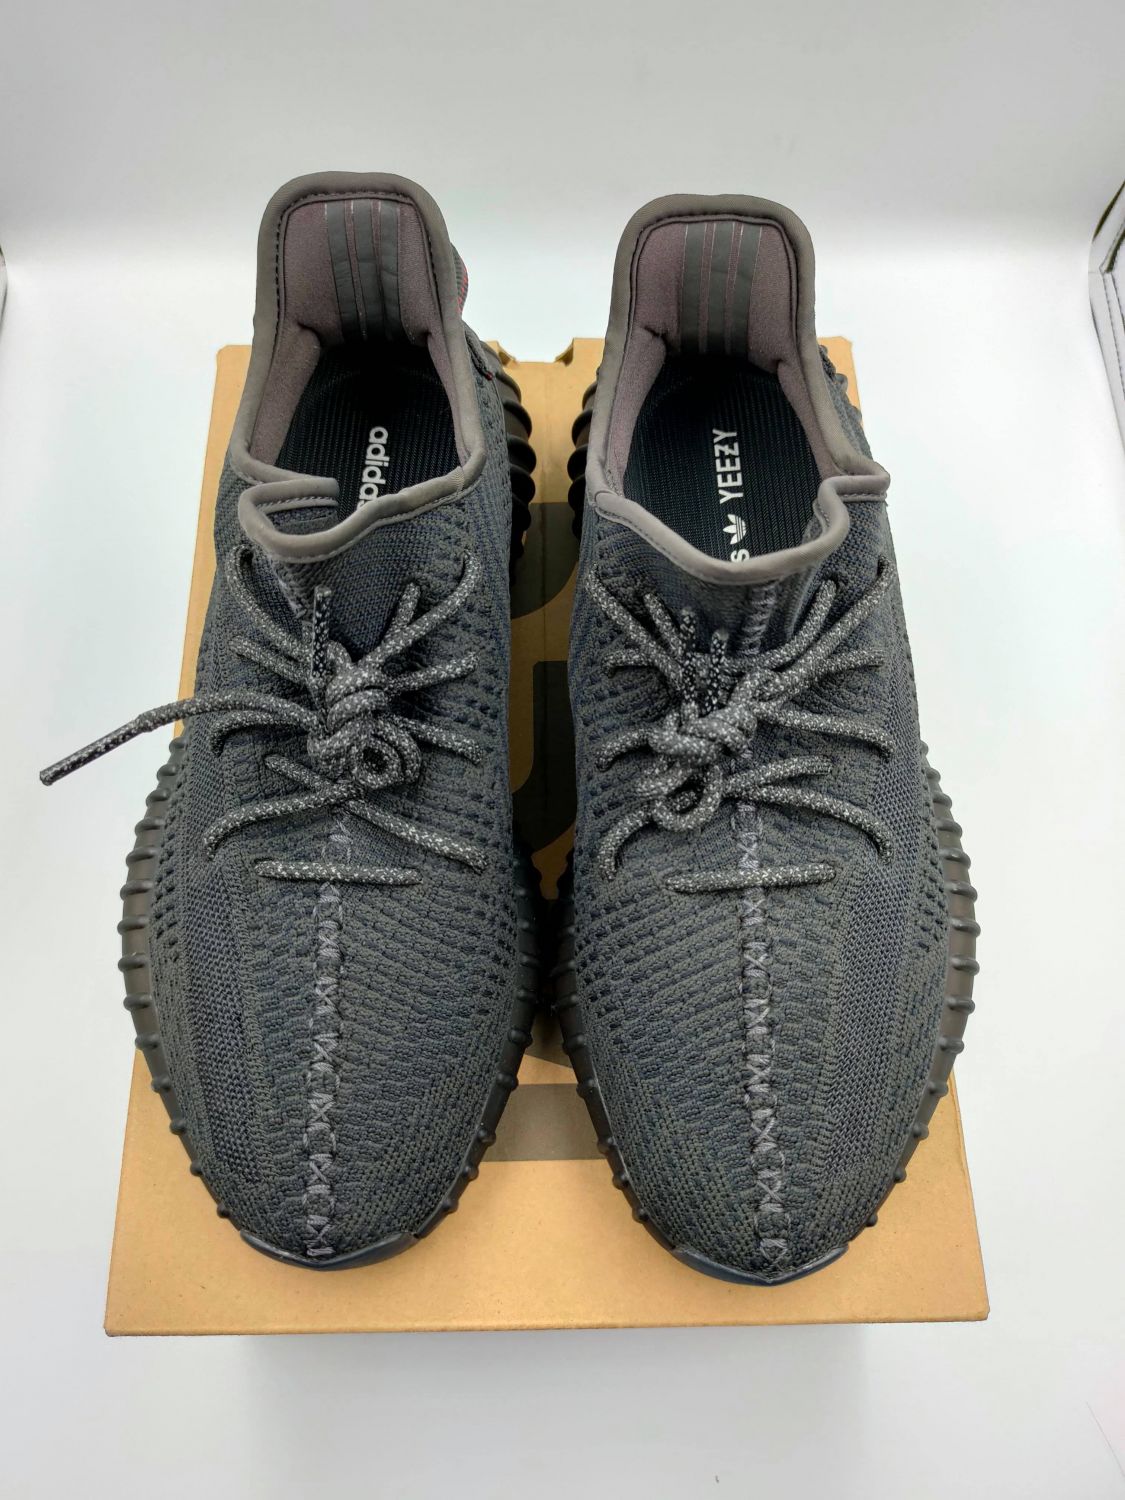 Adidas Yeezy Boost 350 V2 Black (Non-Reflective) | AfterMarket